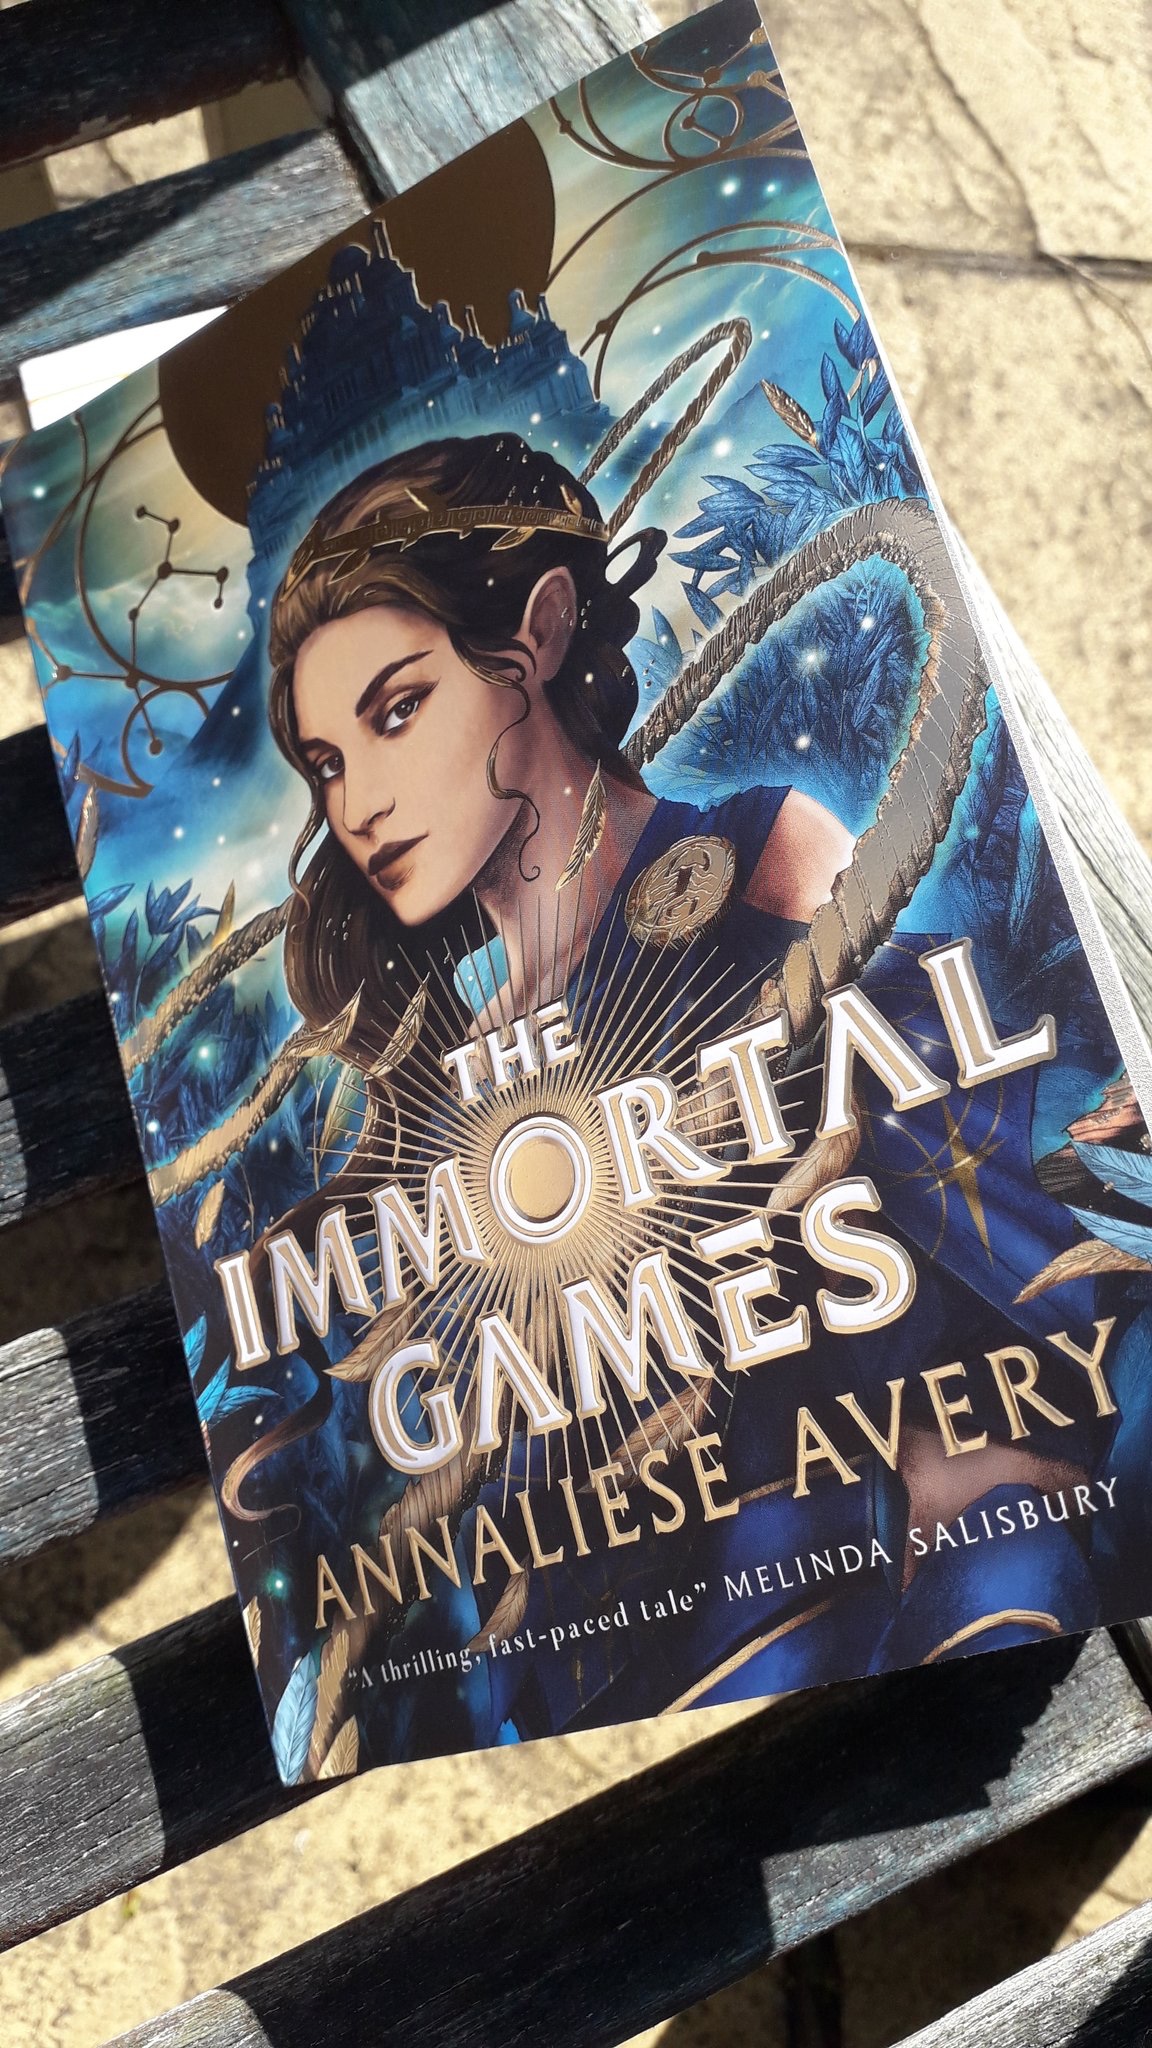 Immortal Games - by Annaliese Avery (Paperback)